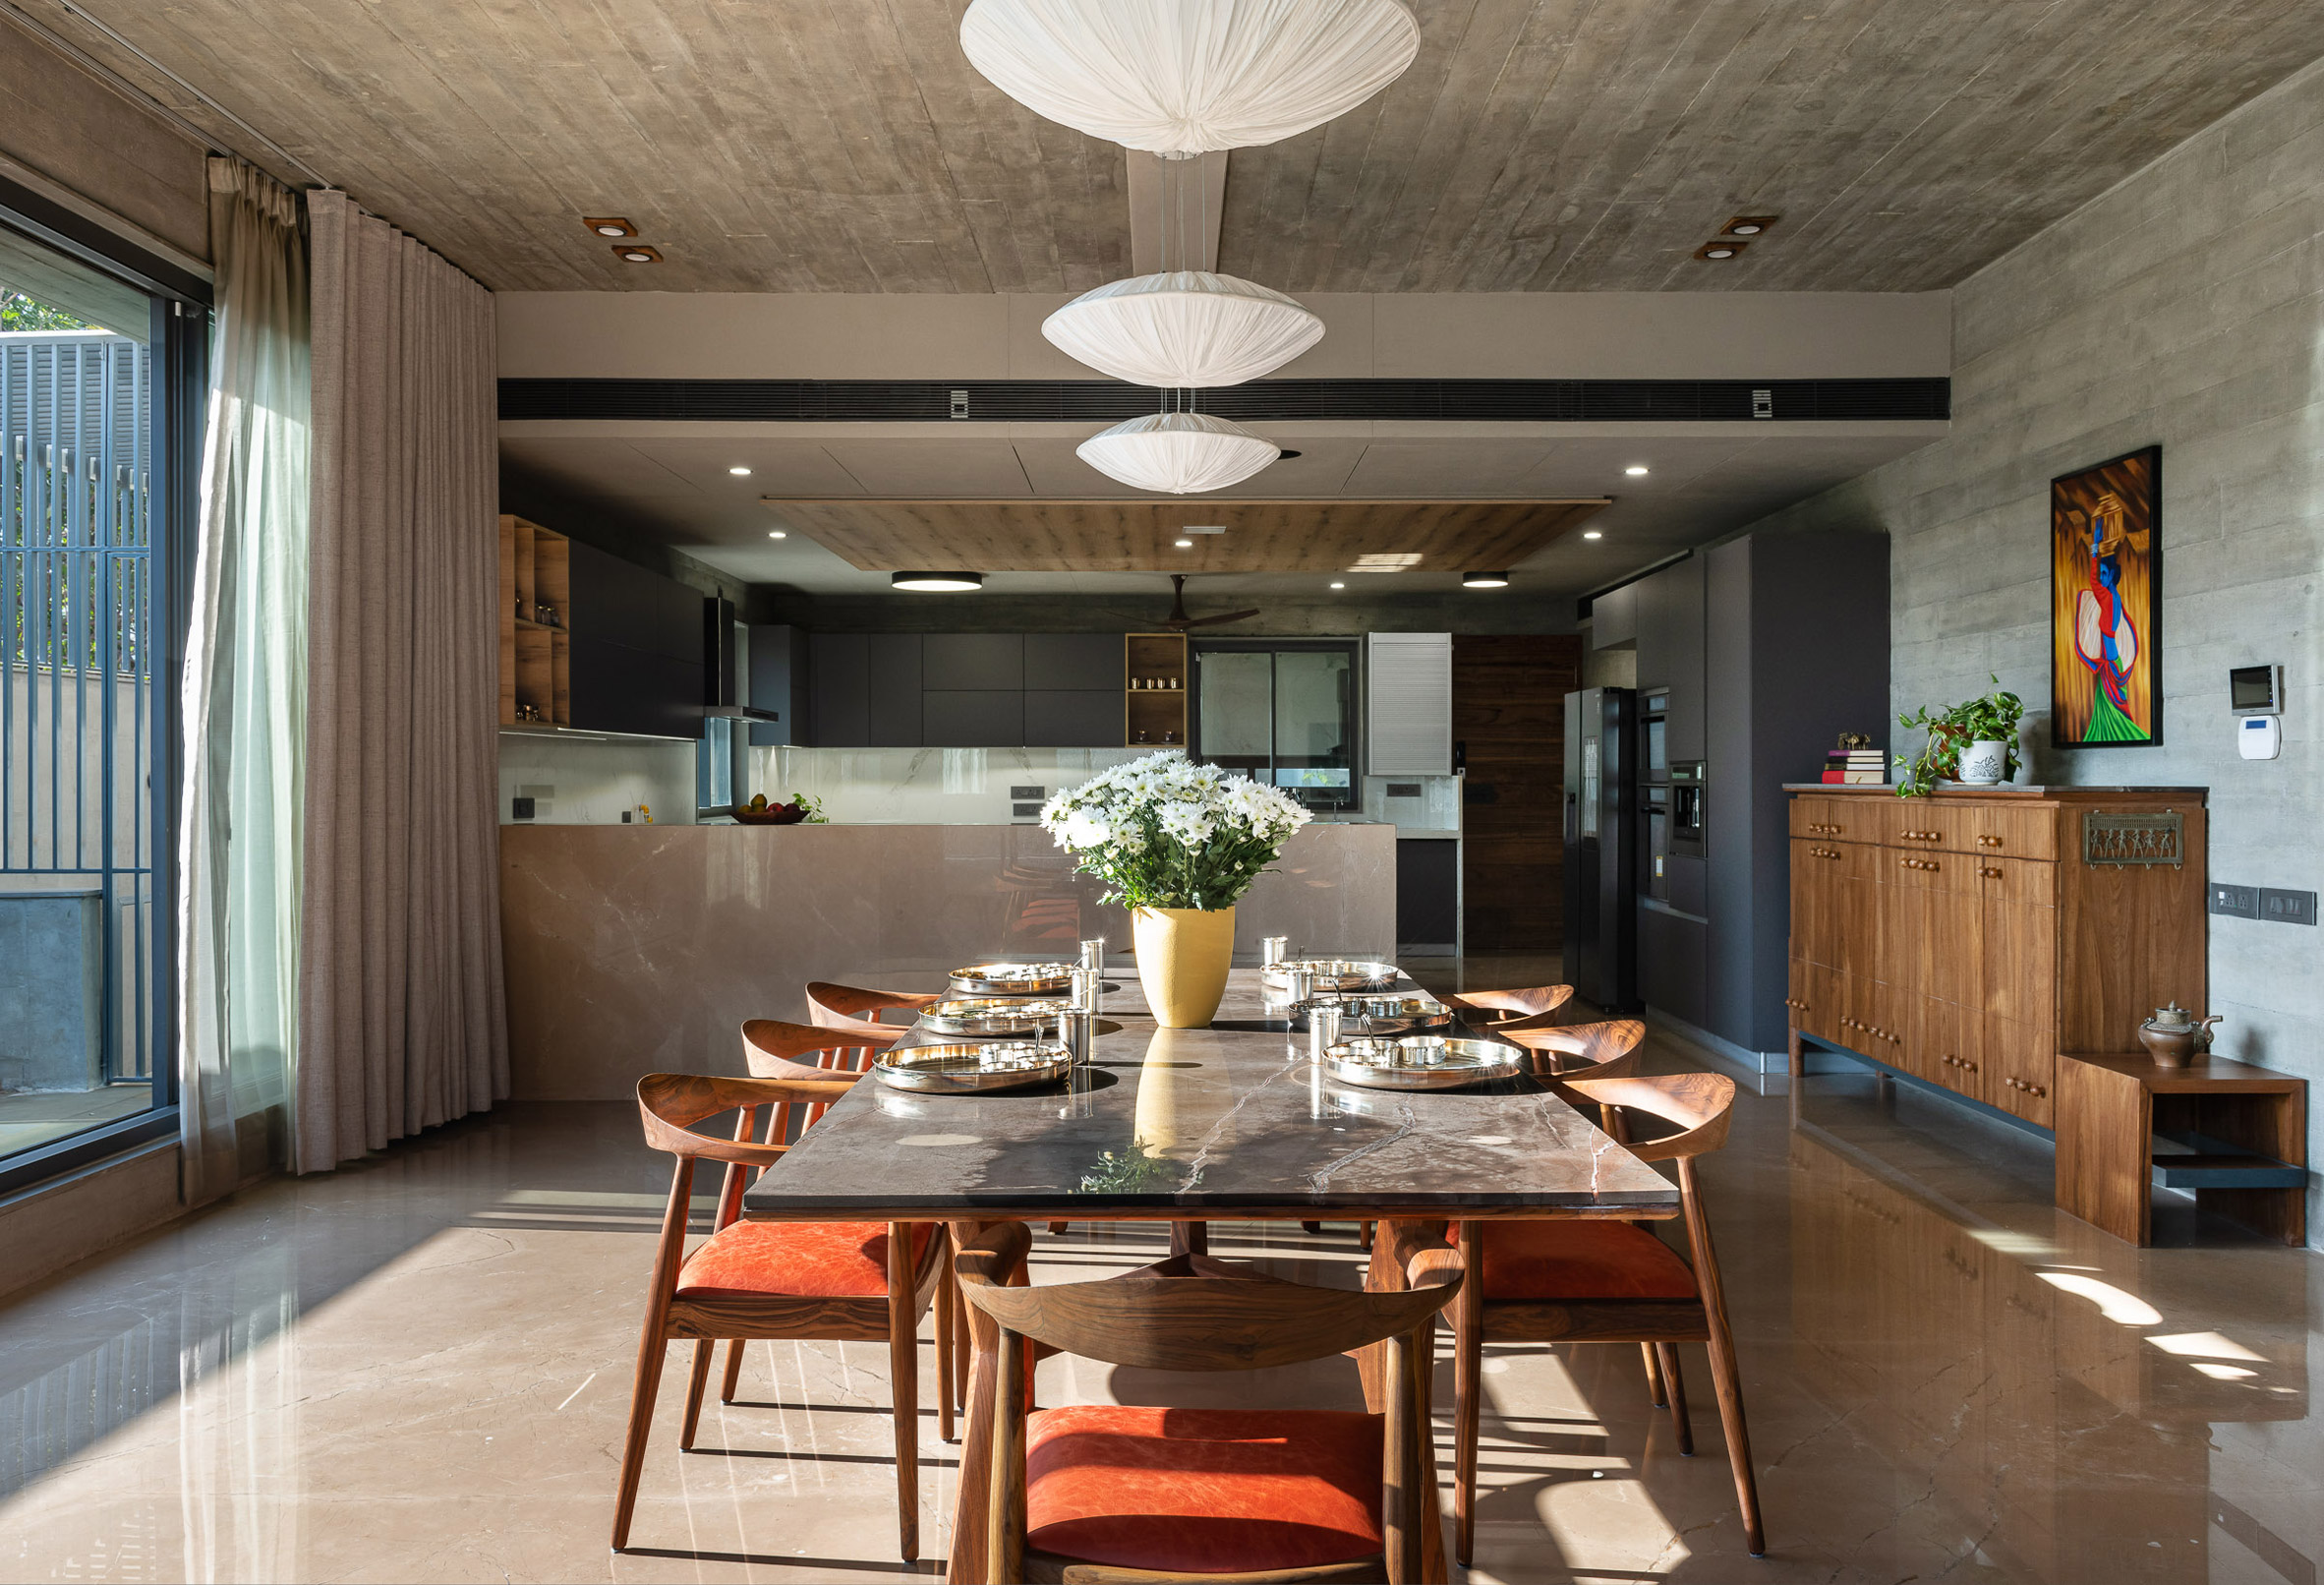 Interior image of a formal dining area at the concrete home